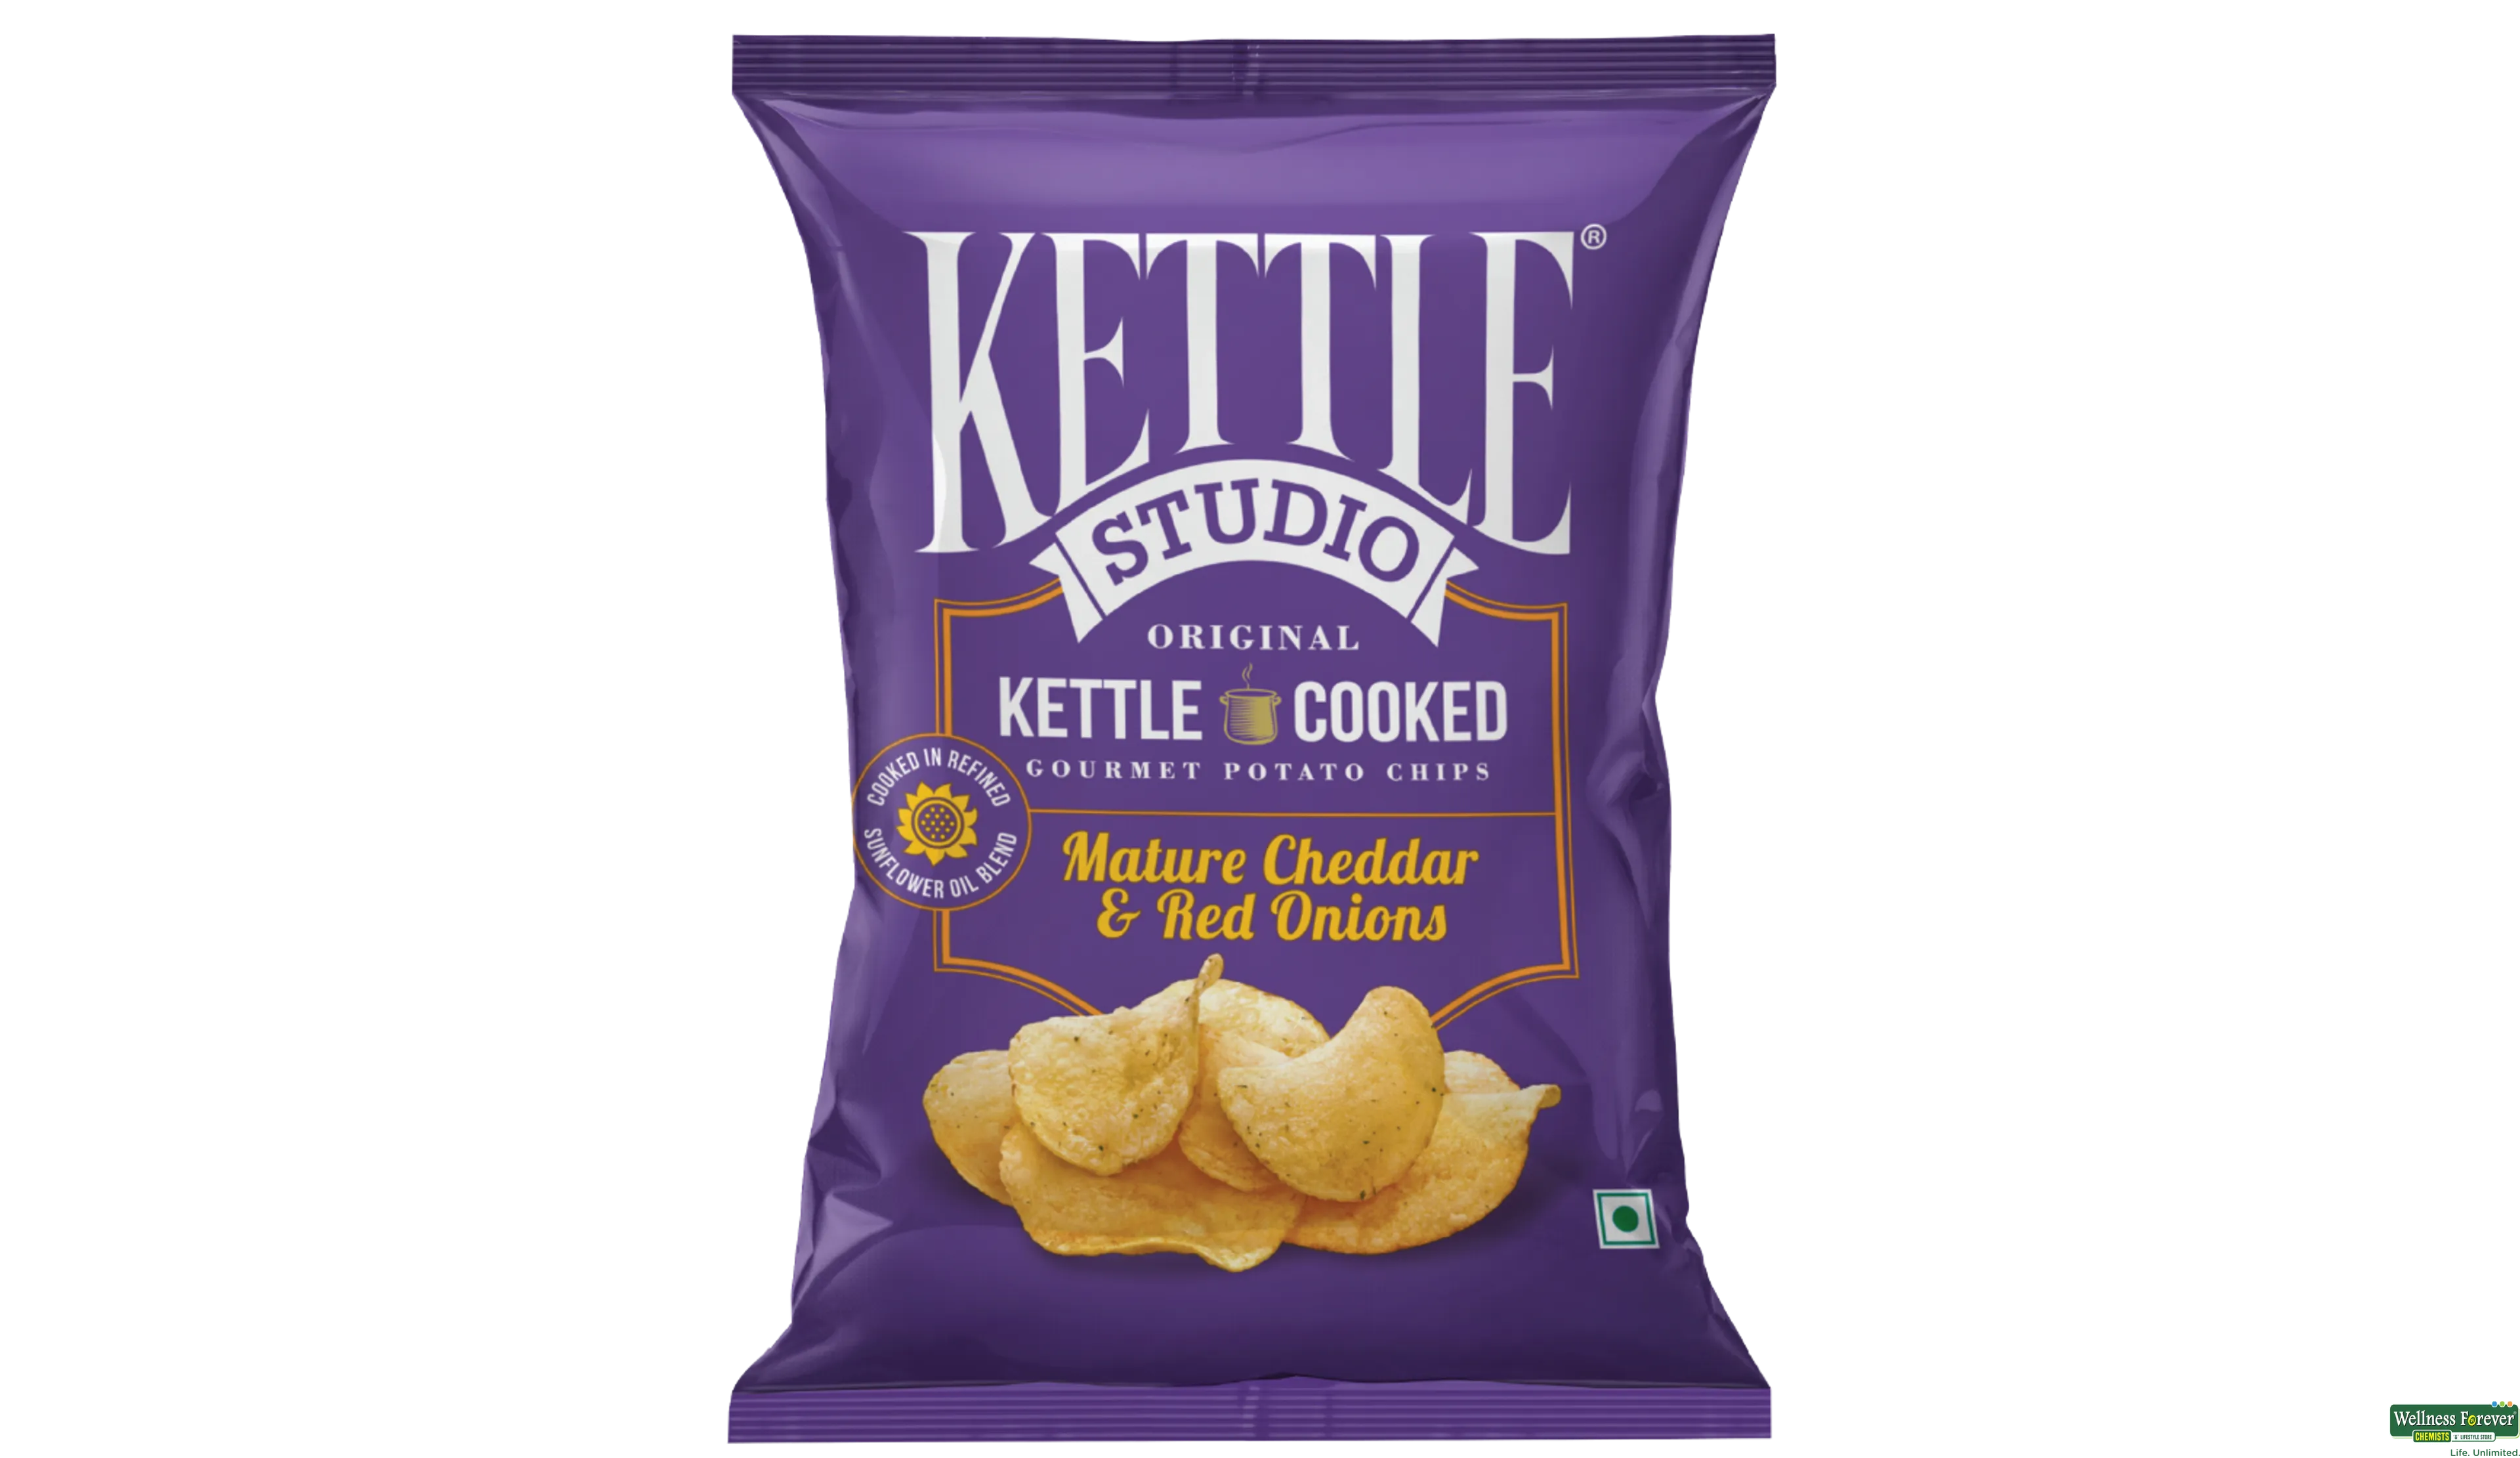 KETTLE CHIPS MATURE CHEDDAR & RED ONION 113GM- 1, 113GM, 